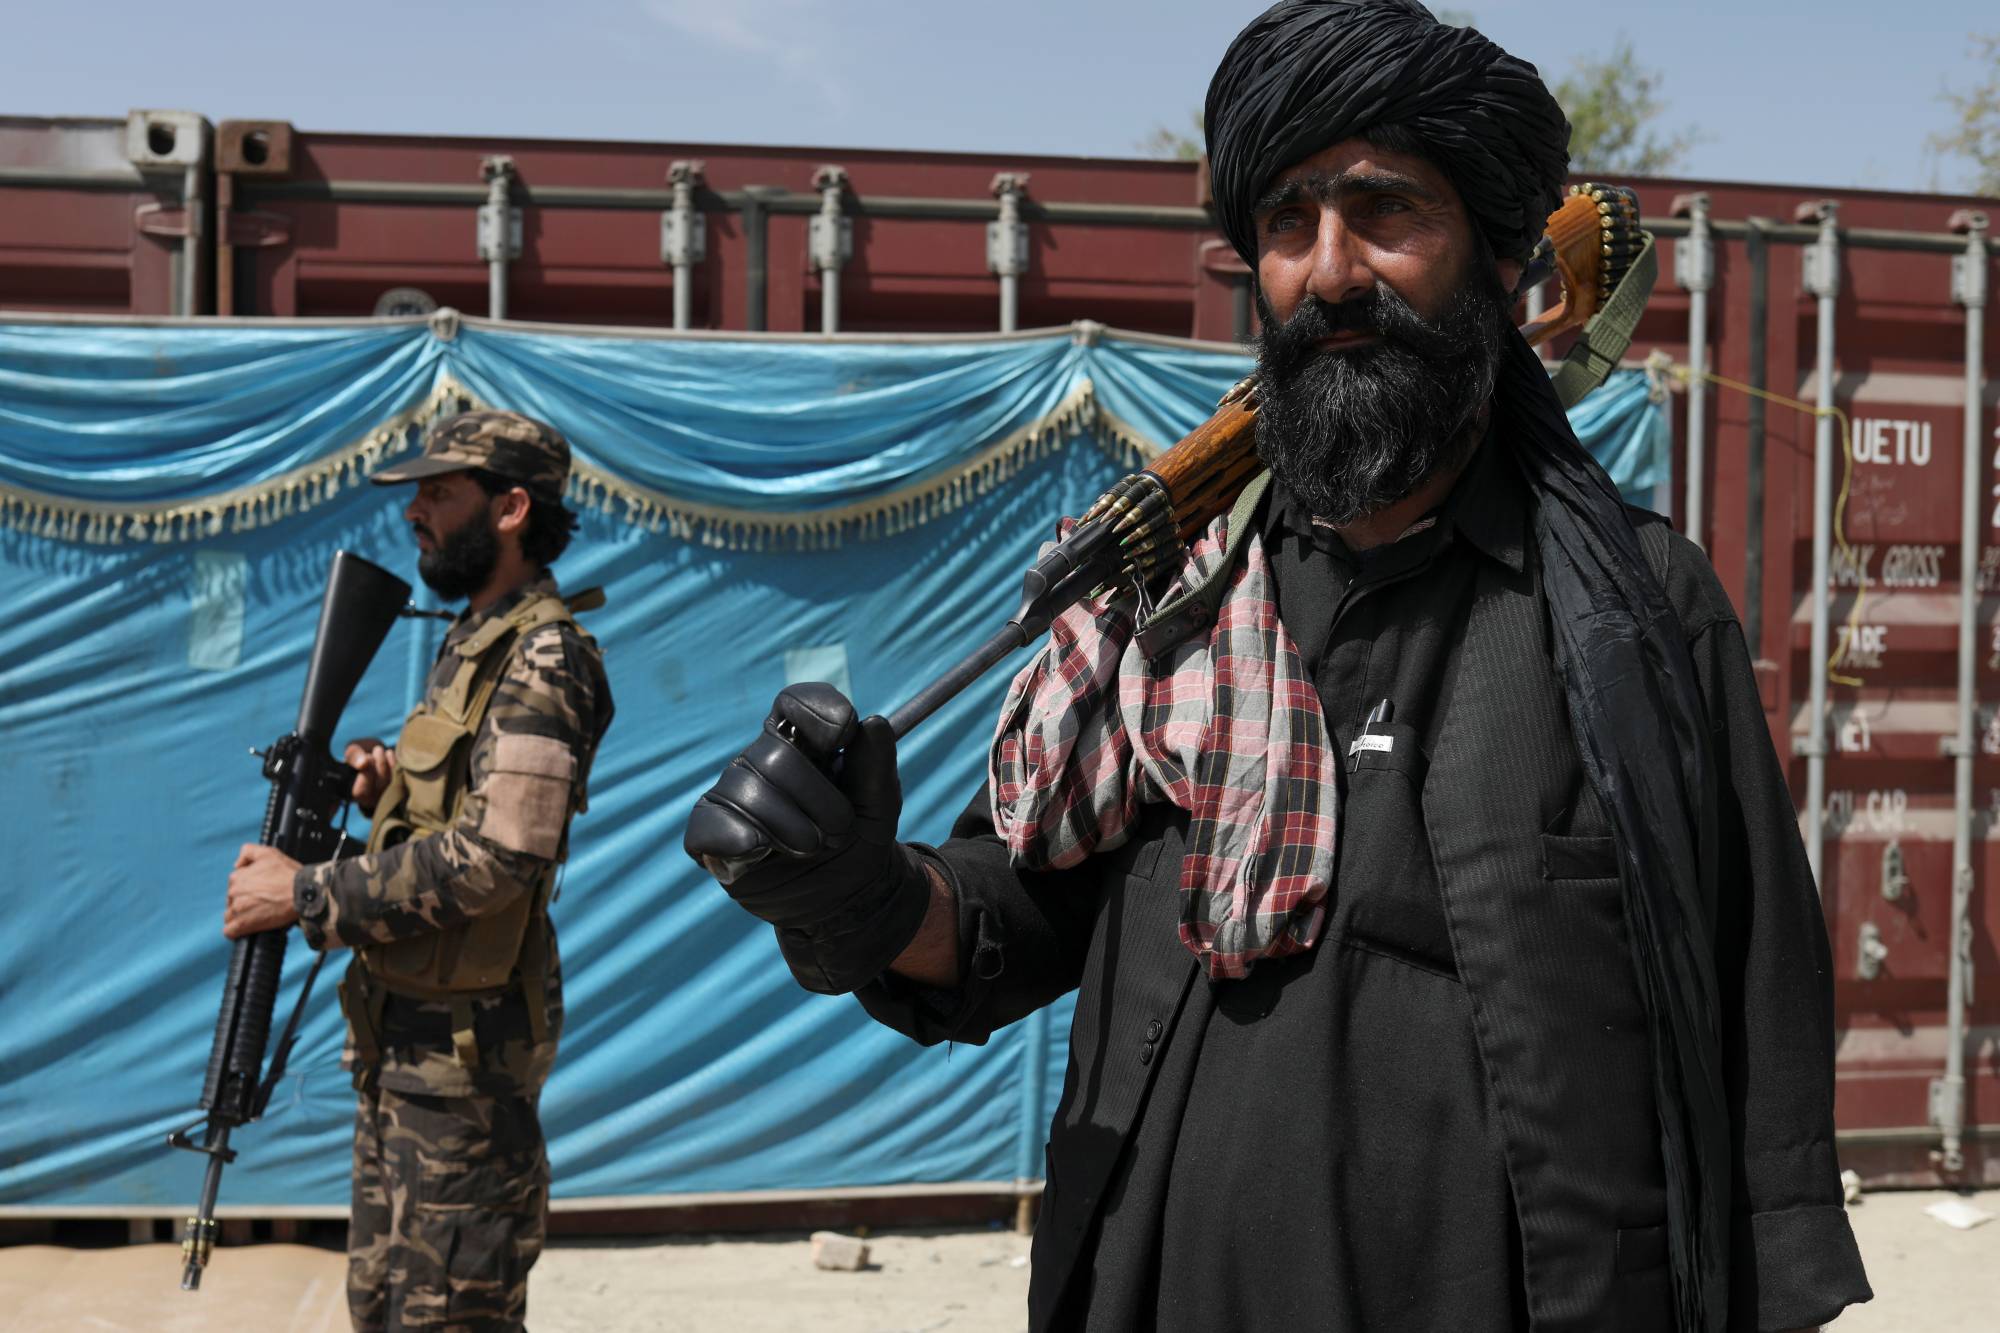 Taliban fighters stand guard while people wait to receive sacks of rice as part of humanitarian aid sent by China to Afghanistan, at a distribution center in Kabul on April 7. | REUTERS